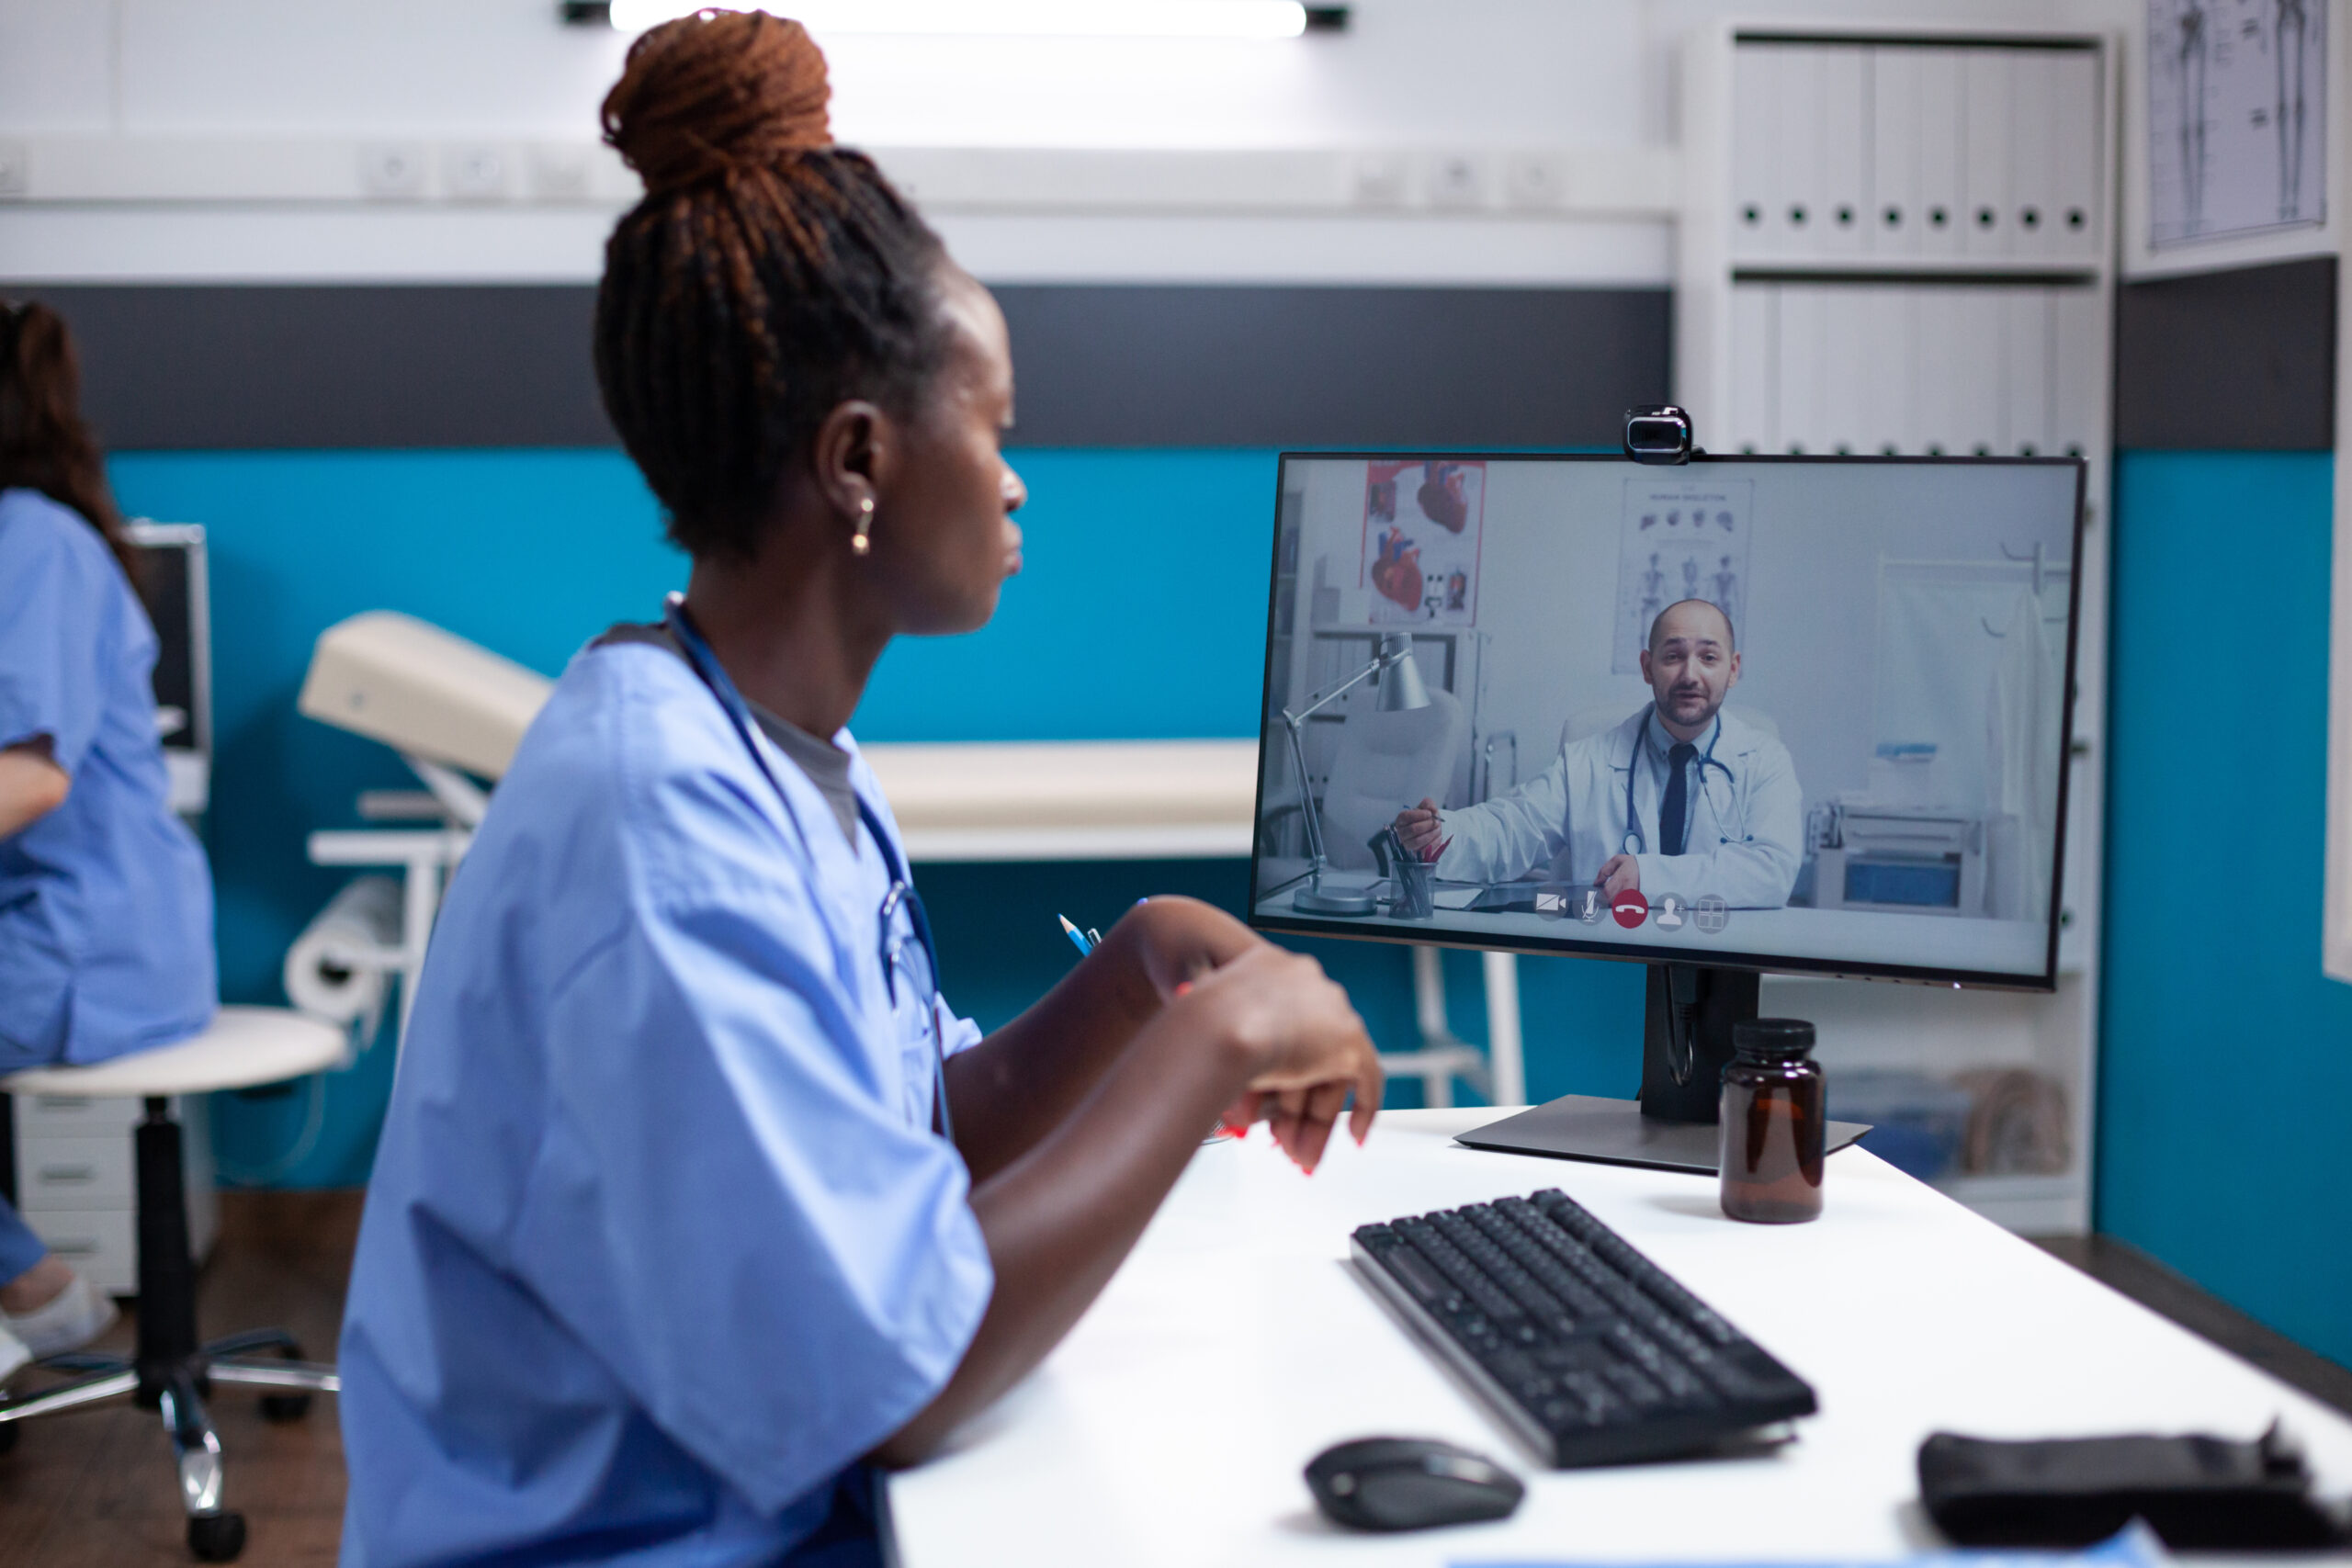 Nurse in videocall listening to doctor